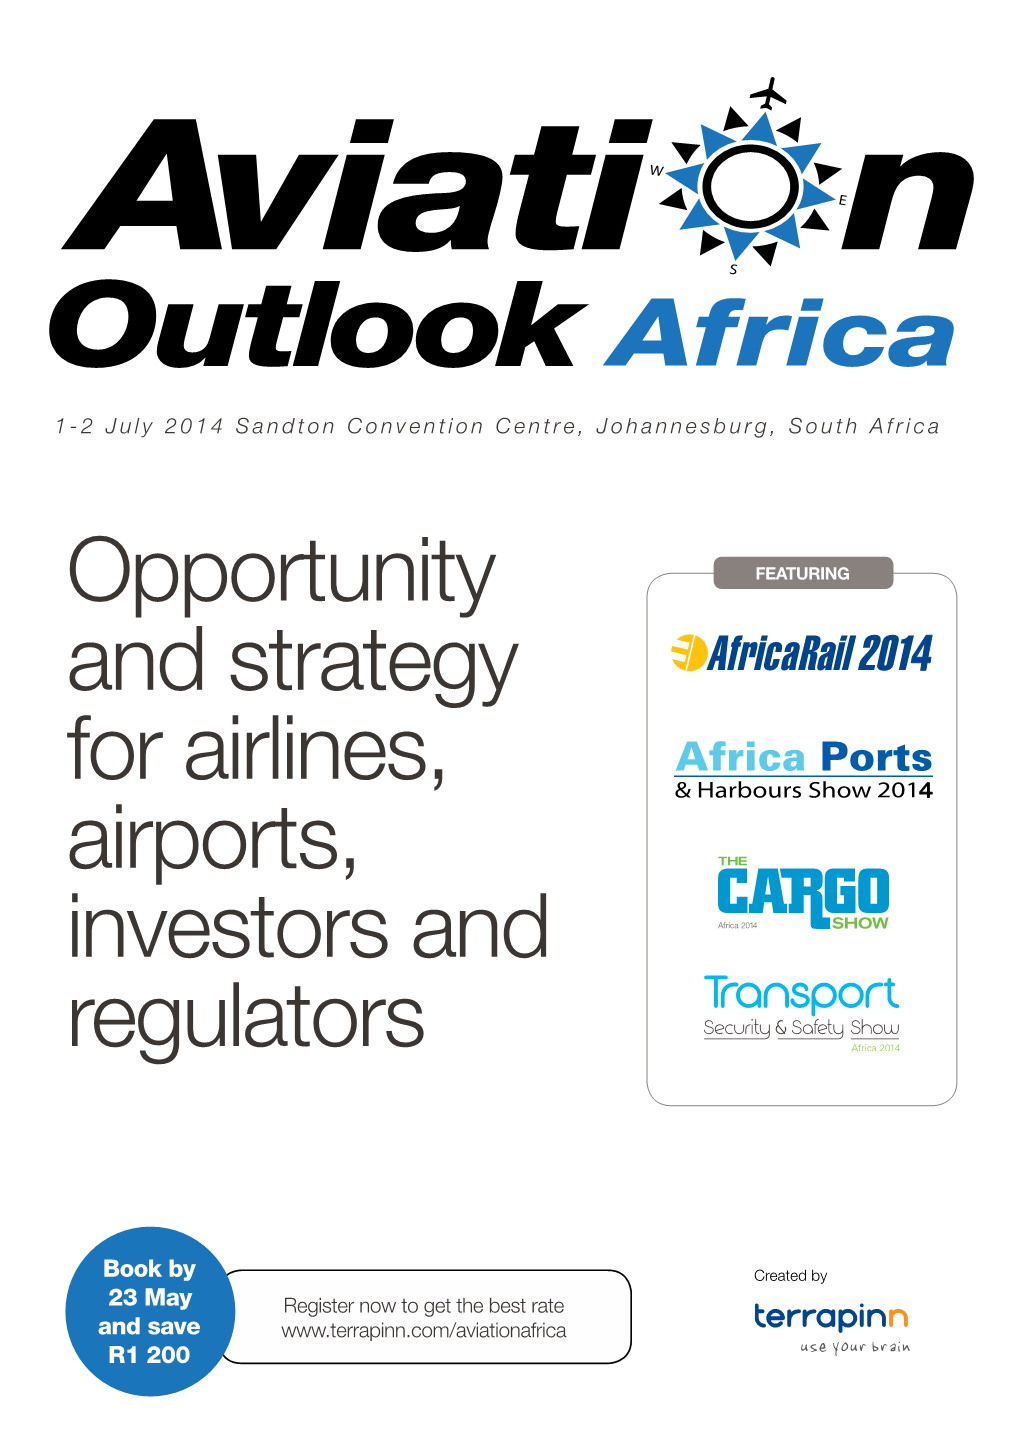 Aviation Outlook Africa Is the Region’S Definitive Leadership Convention for African Aviation Professionals Seeking to Promote Development Within the Sector